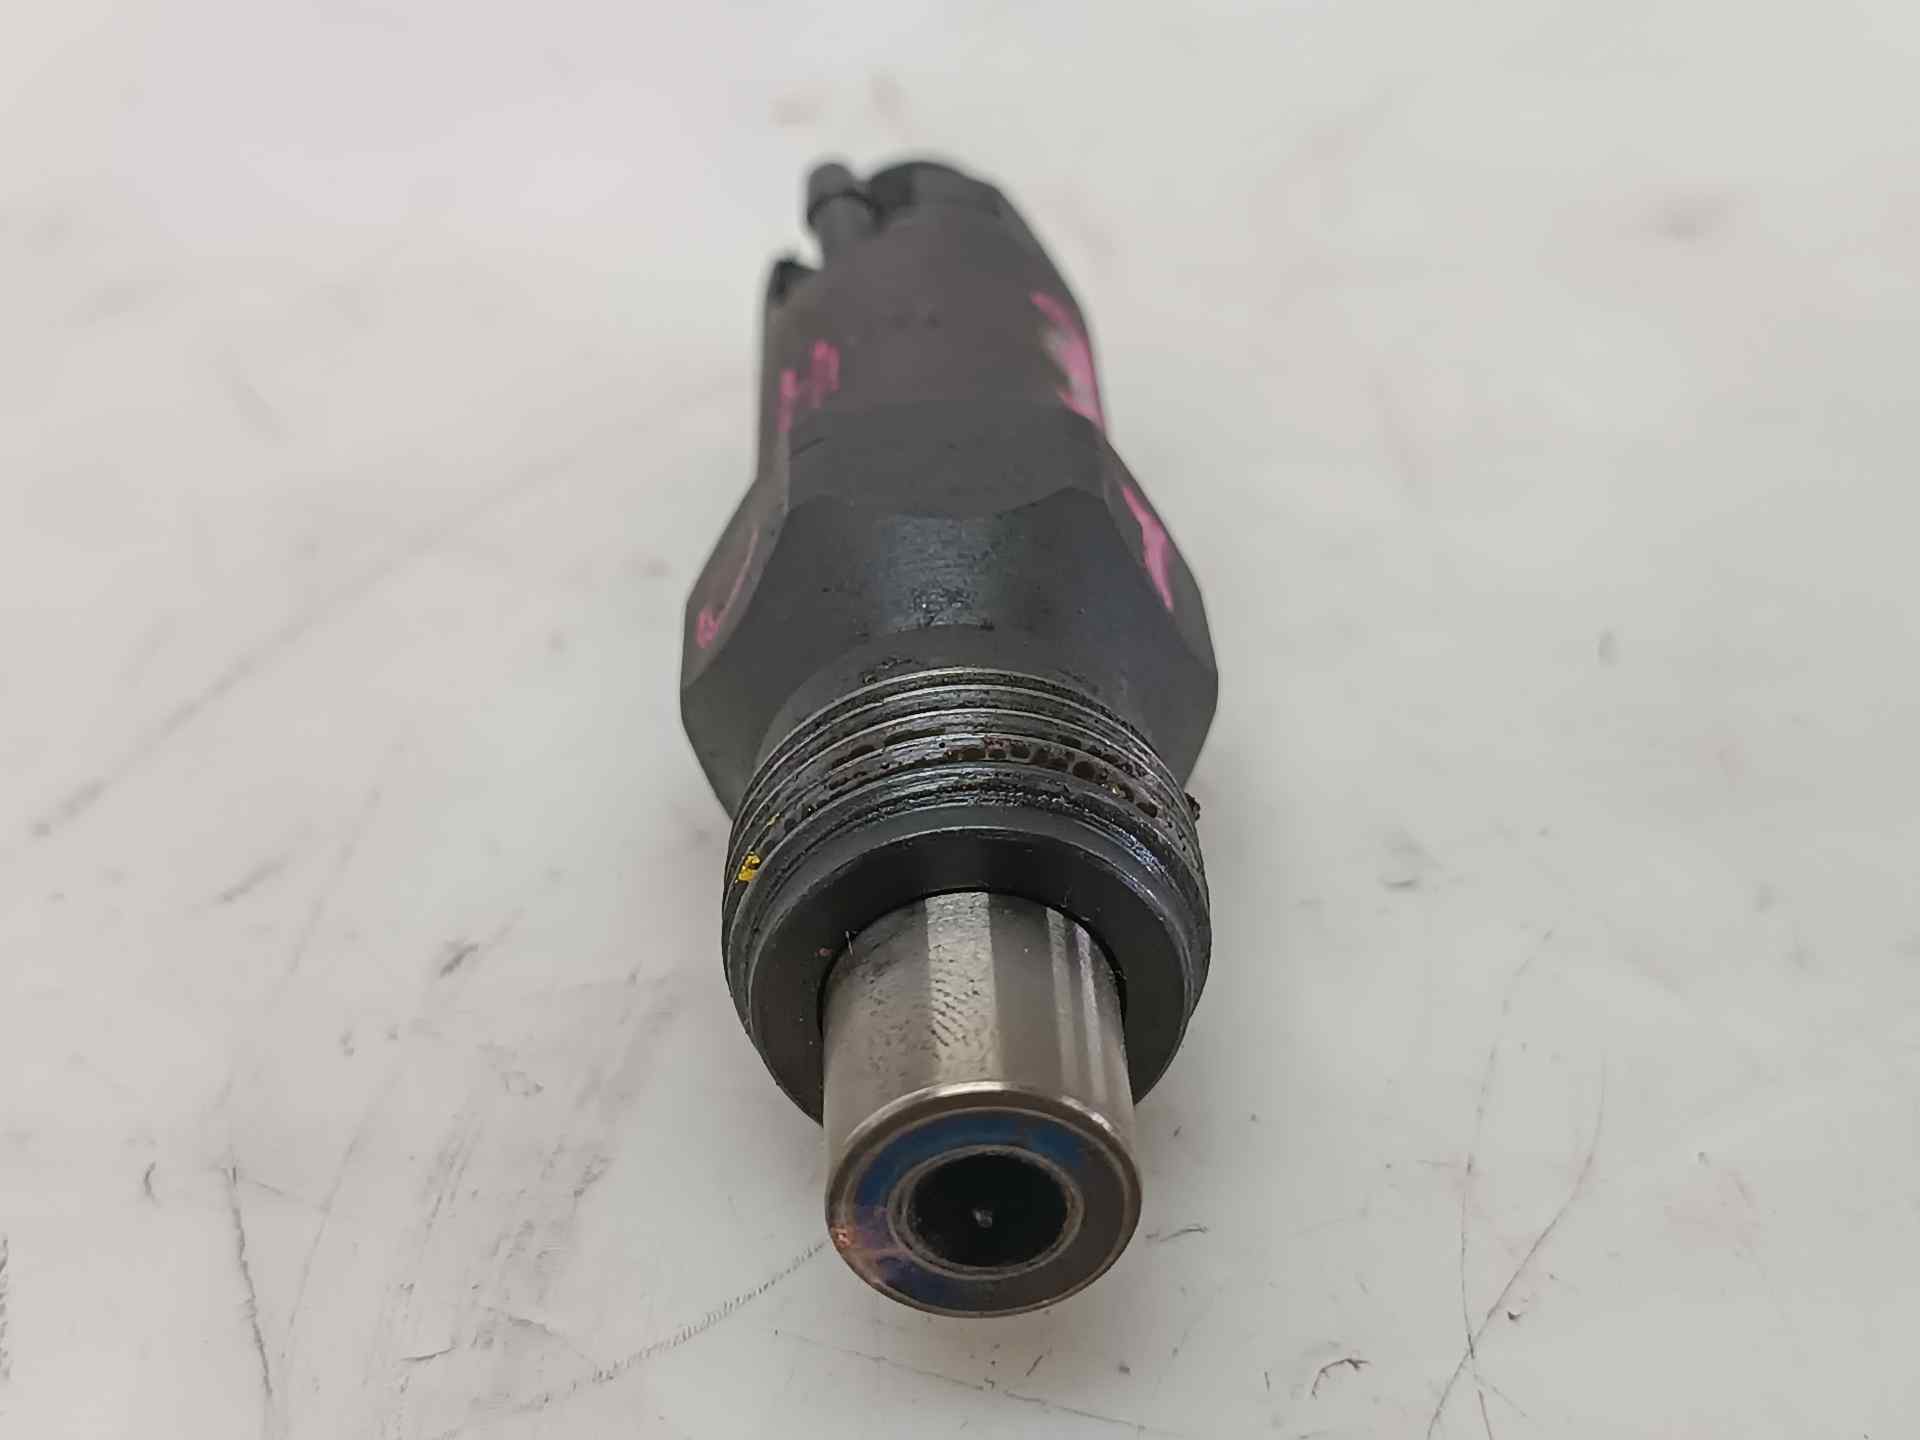 RENAULT Clio 3 generation (2005-2012) Fuel Injector LCR6735405, LCR6735405 24584549